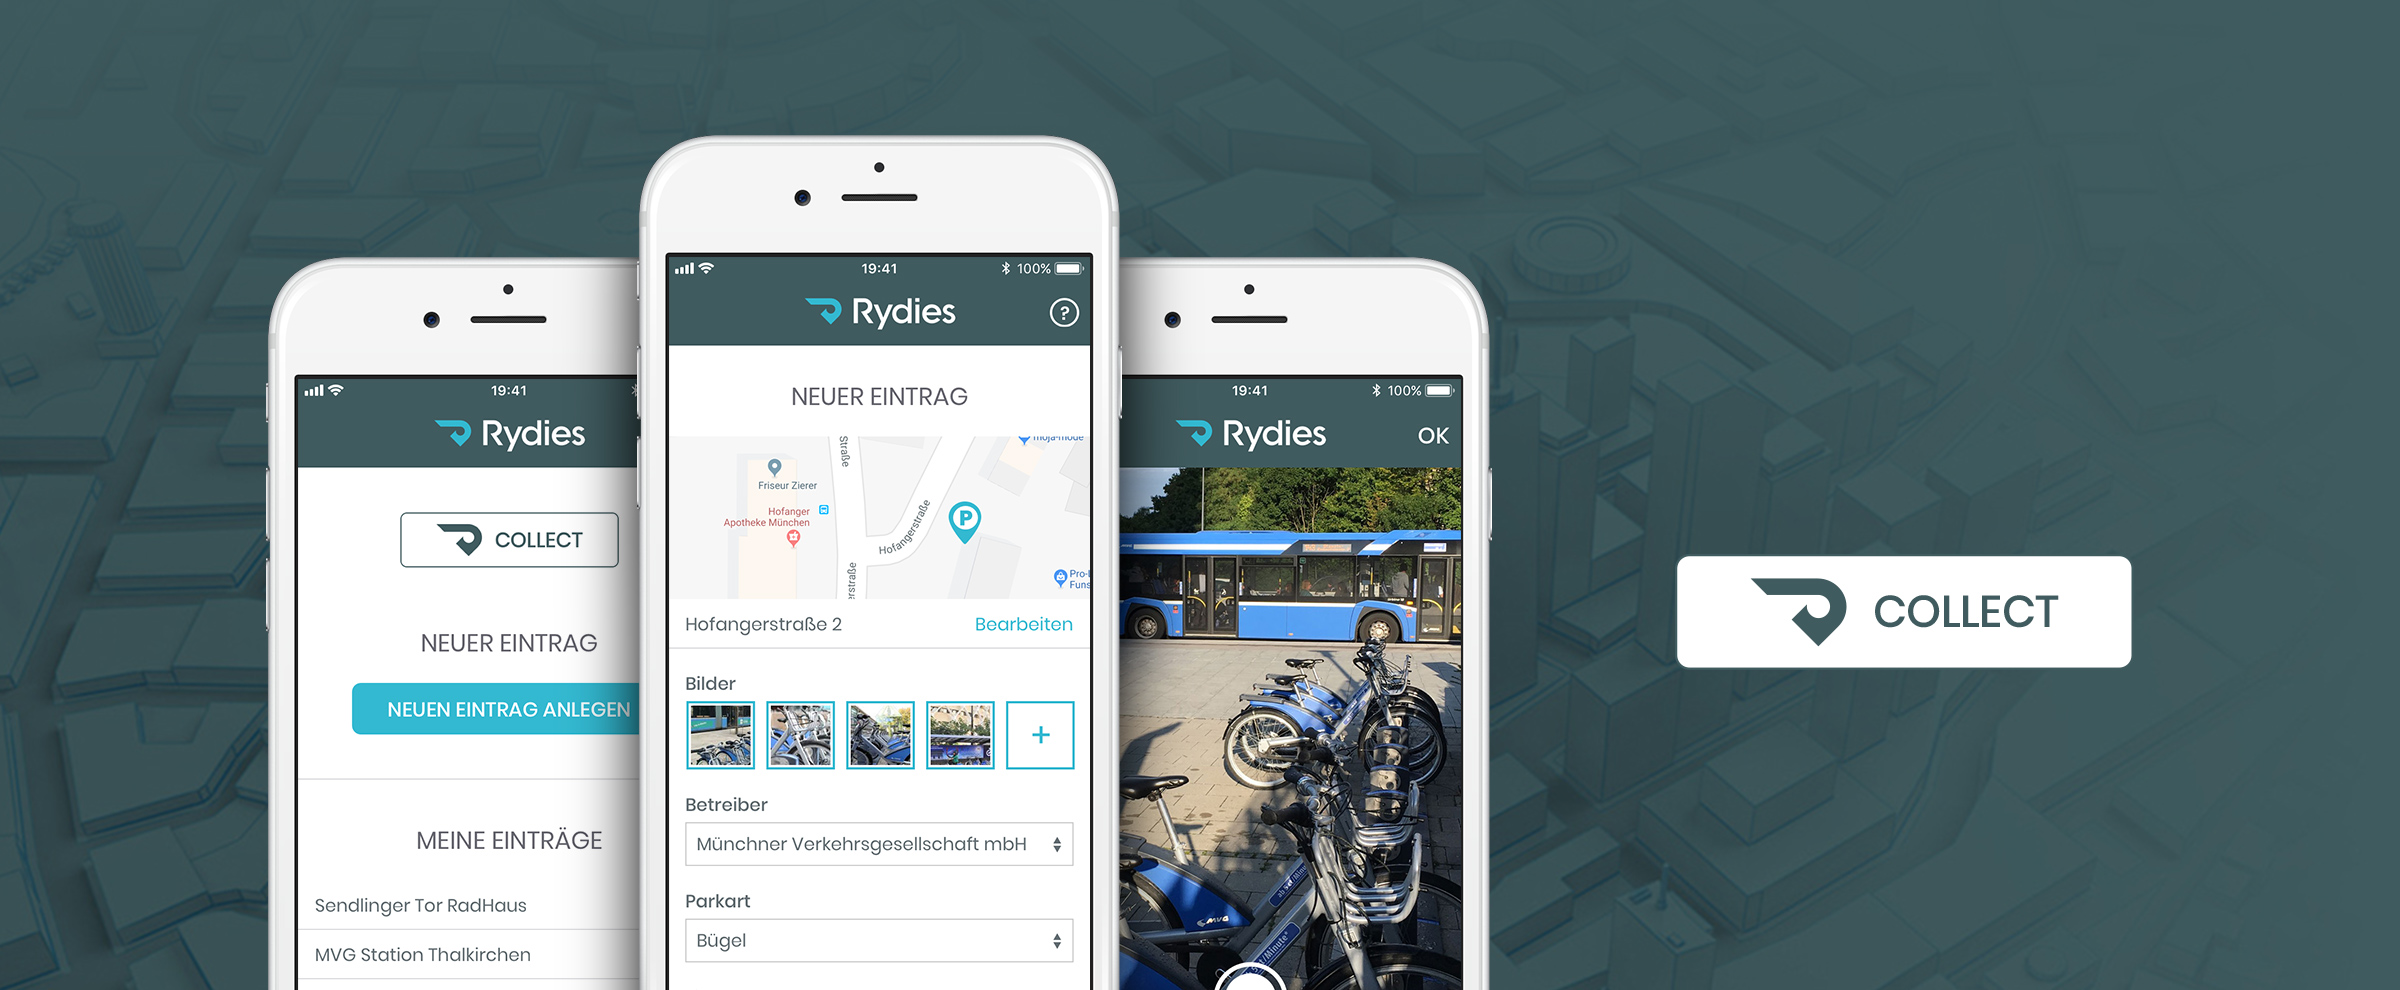 Rydies Collect App